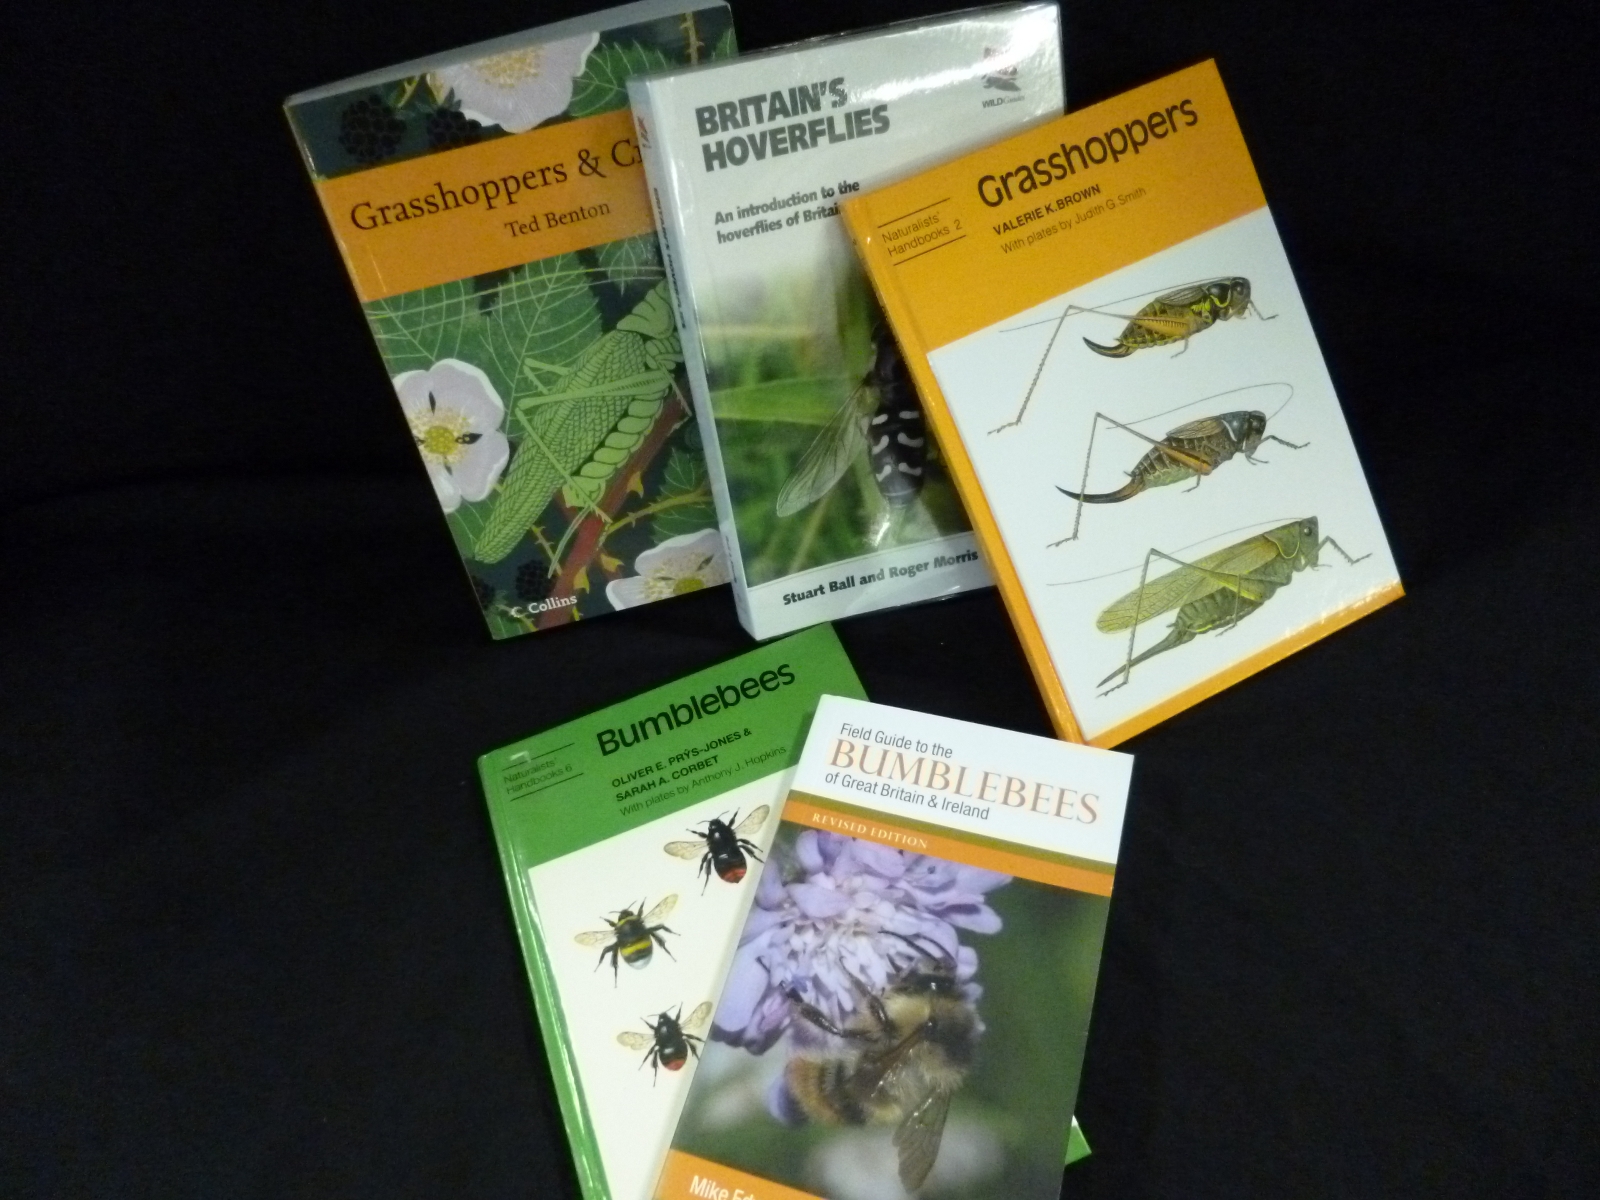 MIKE EDWARDS AND MARTIN JENNER:  FIELD GUIDES TO THE BUMBLEBEES OF GREAT BRITAIN AND IRELAND, 2009